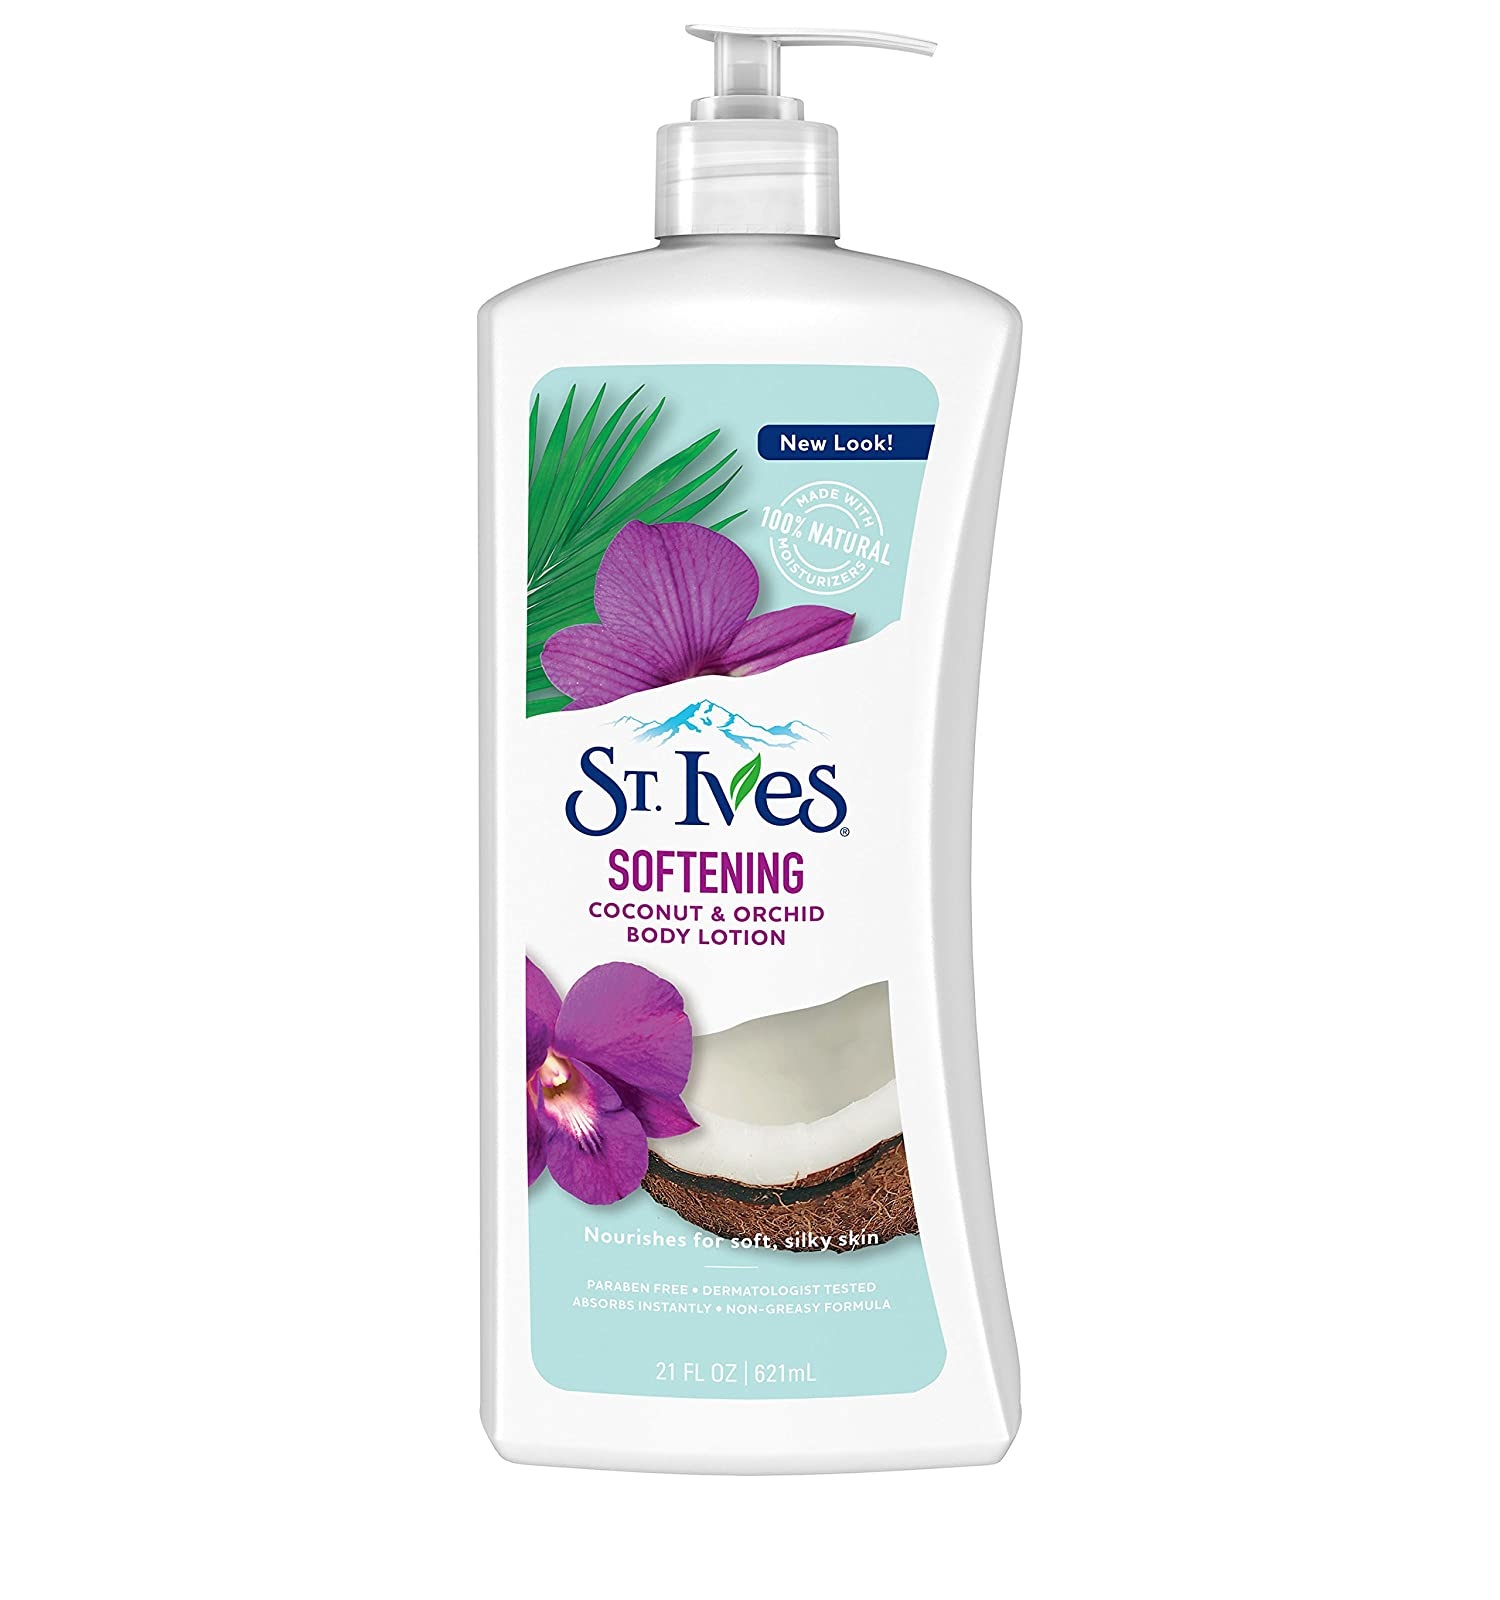 St Ives Softening Coconut and Orchid Body Lotion, 21 Oz - image 1 of 8